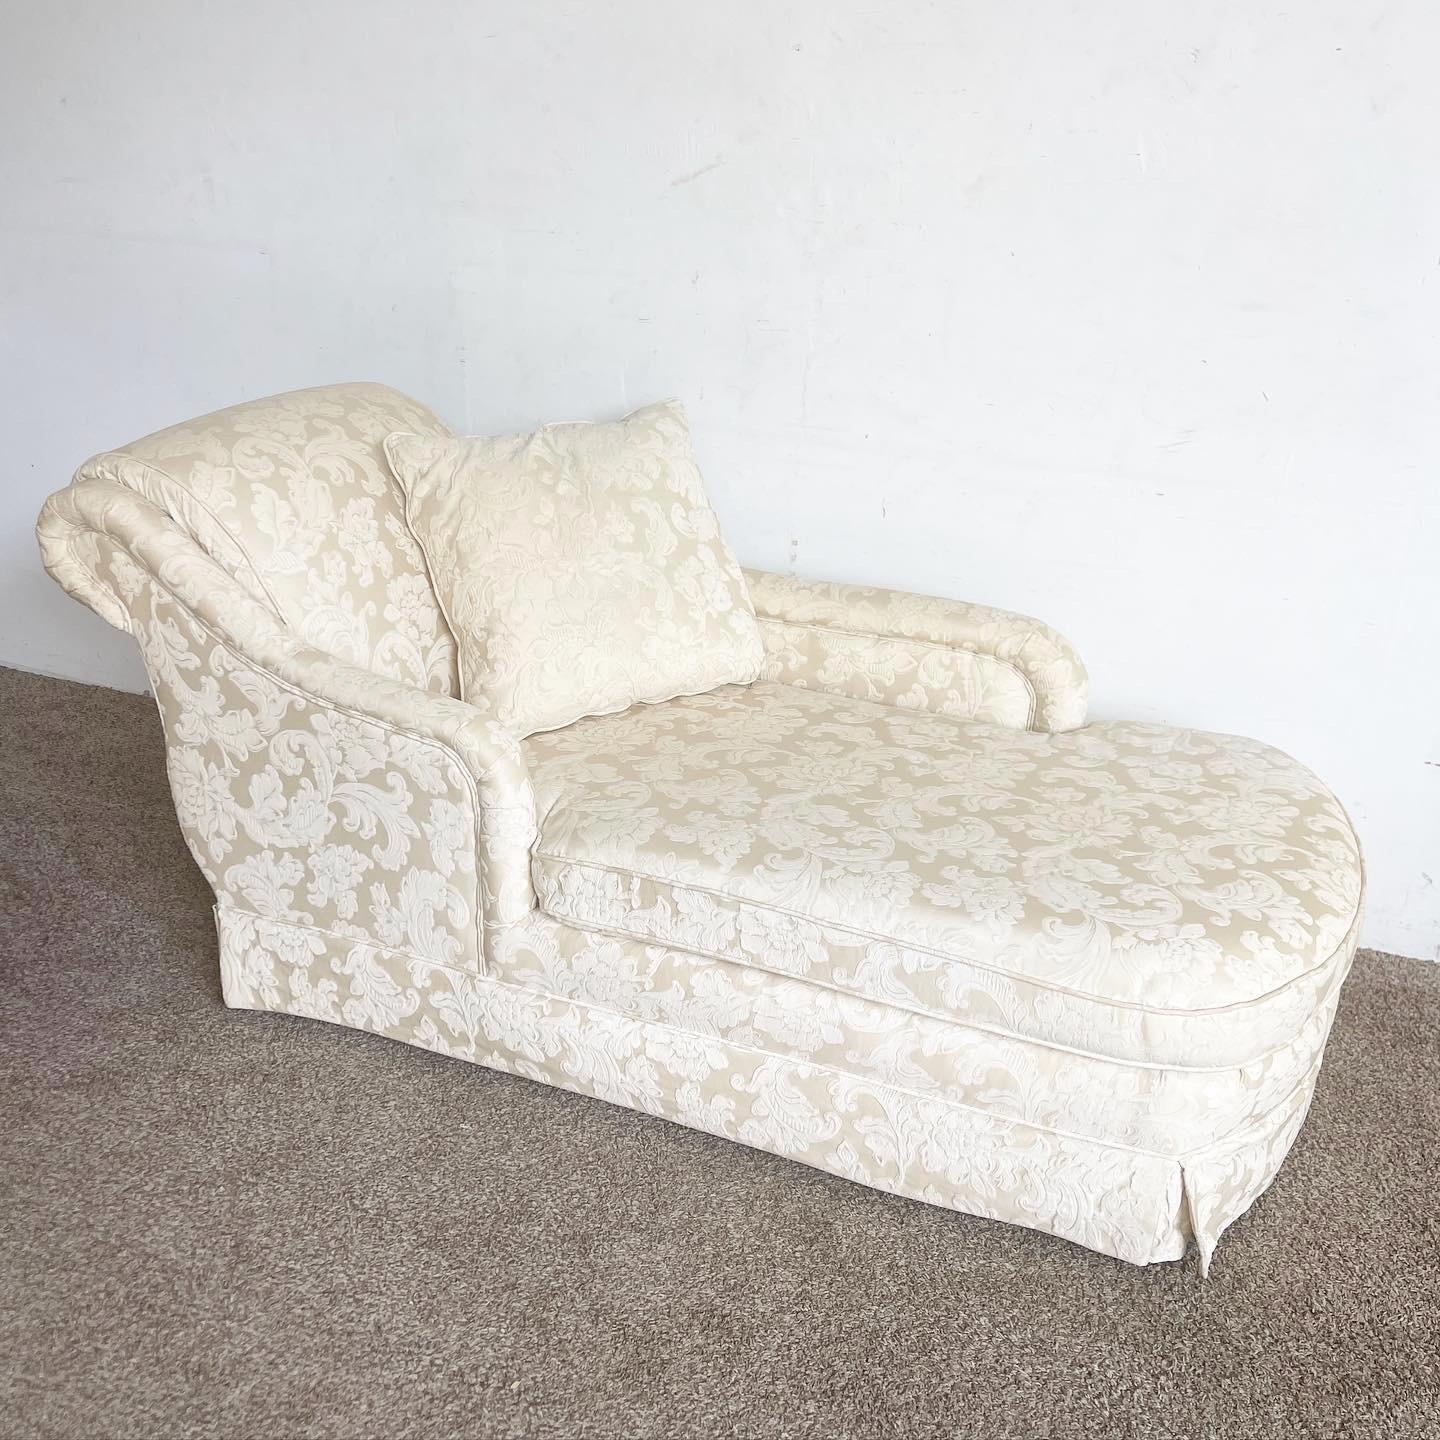 Step into the world of luxury with this Cream Regency Chaise Lounge. Upholstered in a sophisticated cream fabric, it boasts the signature curves and ornate details of the Regency era. Beyond its aesthetic appeal, this chaise offers a comfortable